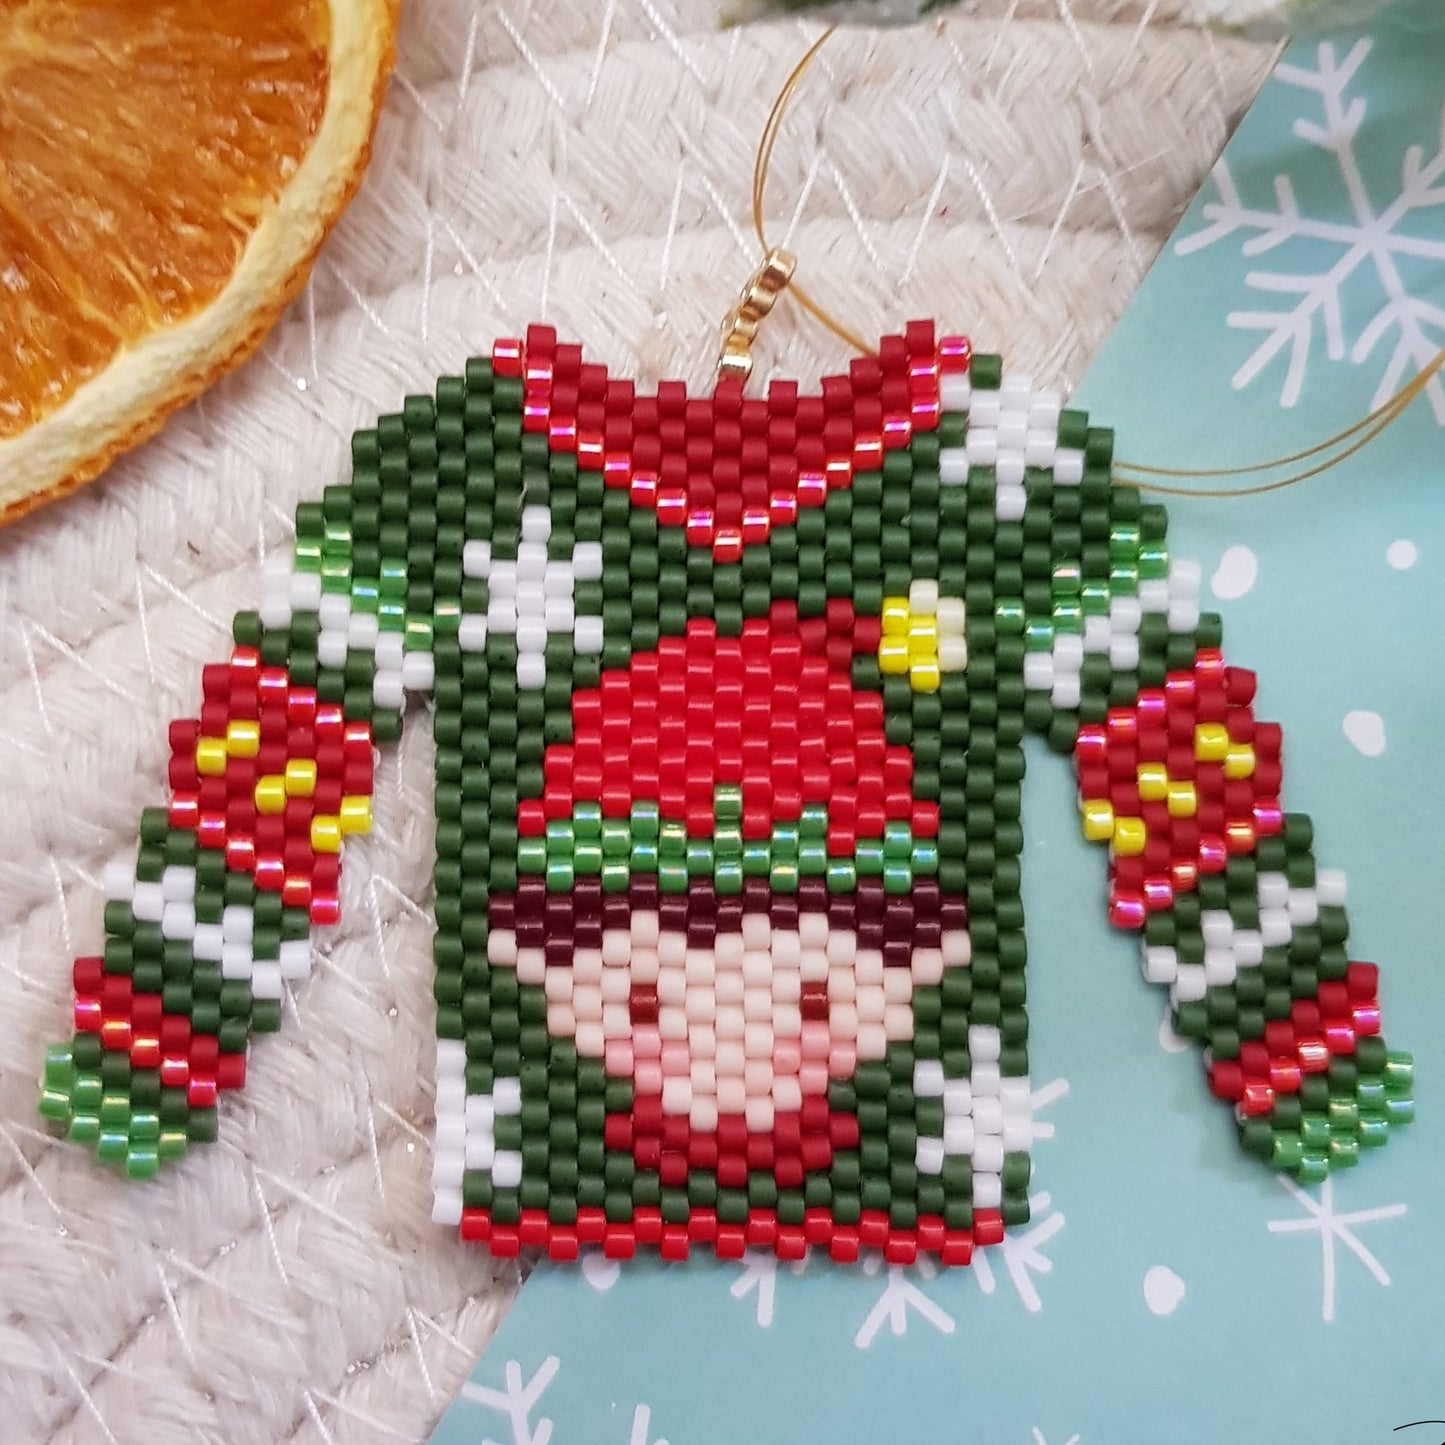 The Christmas sweater